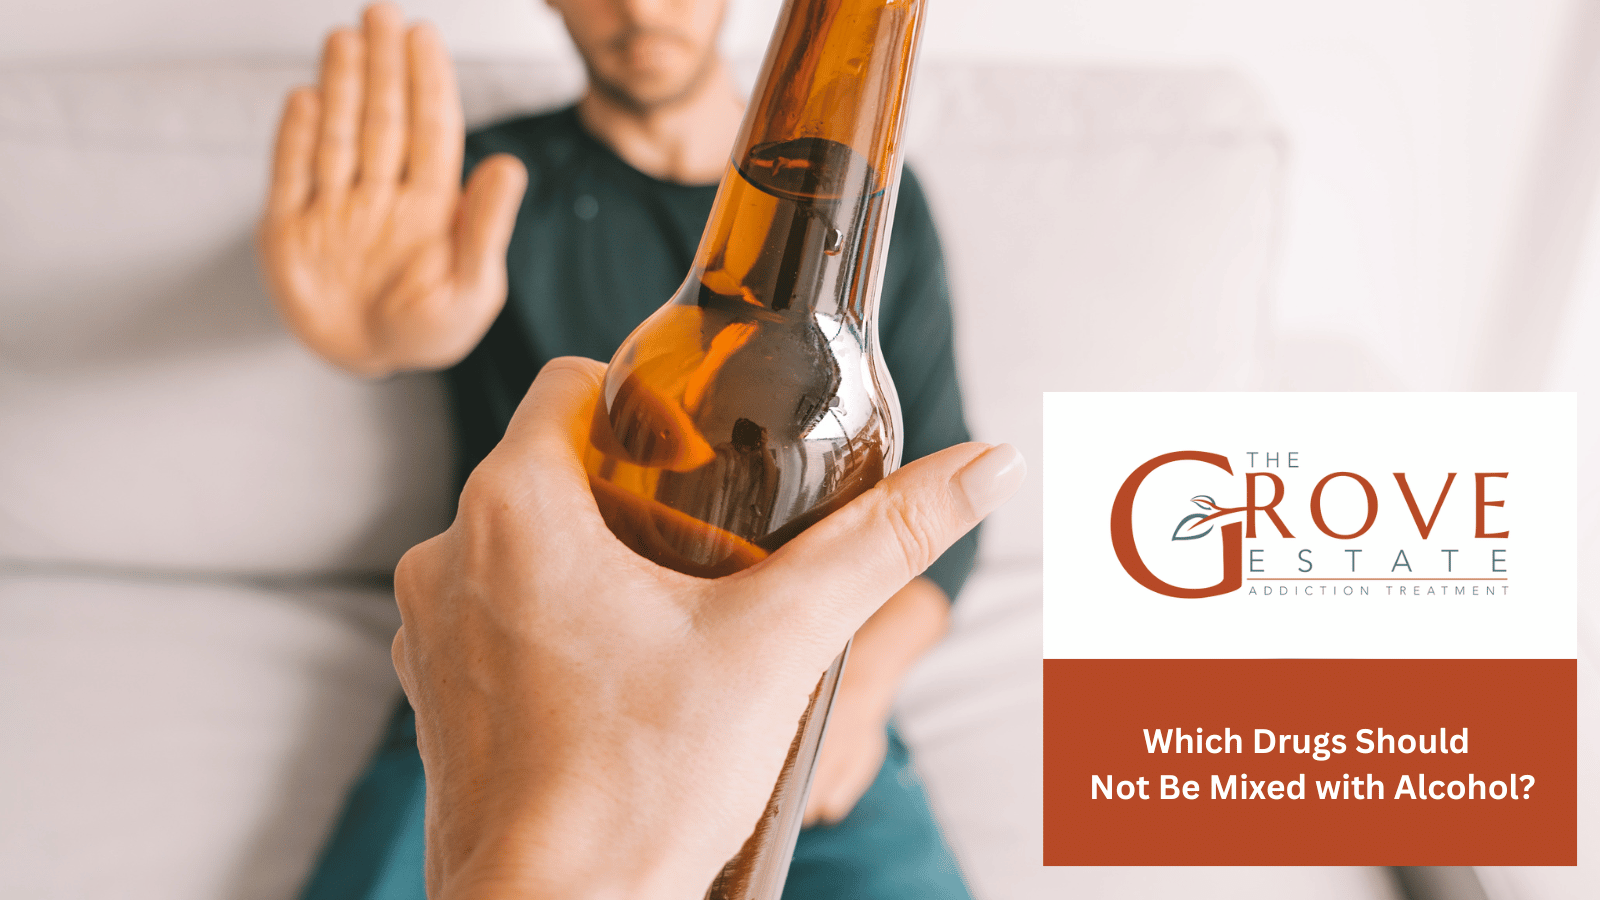 Which Drugs Should Not Be Mixed with Alcohol?